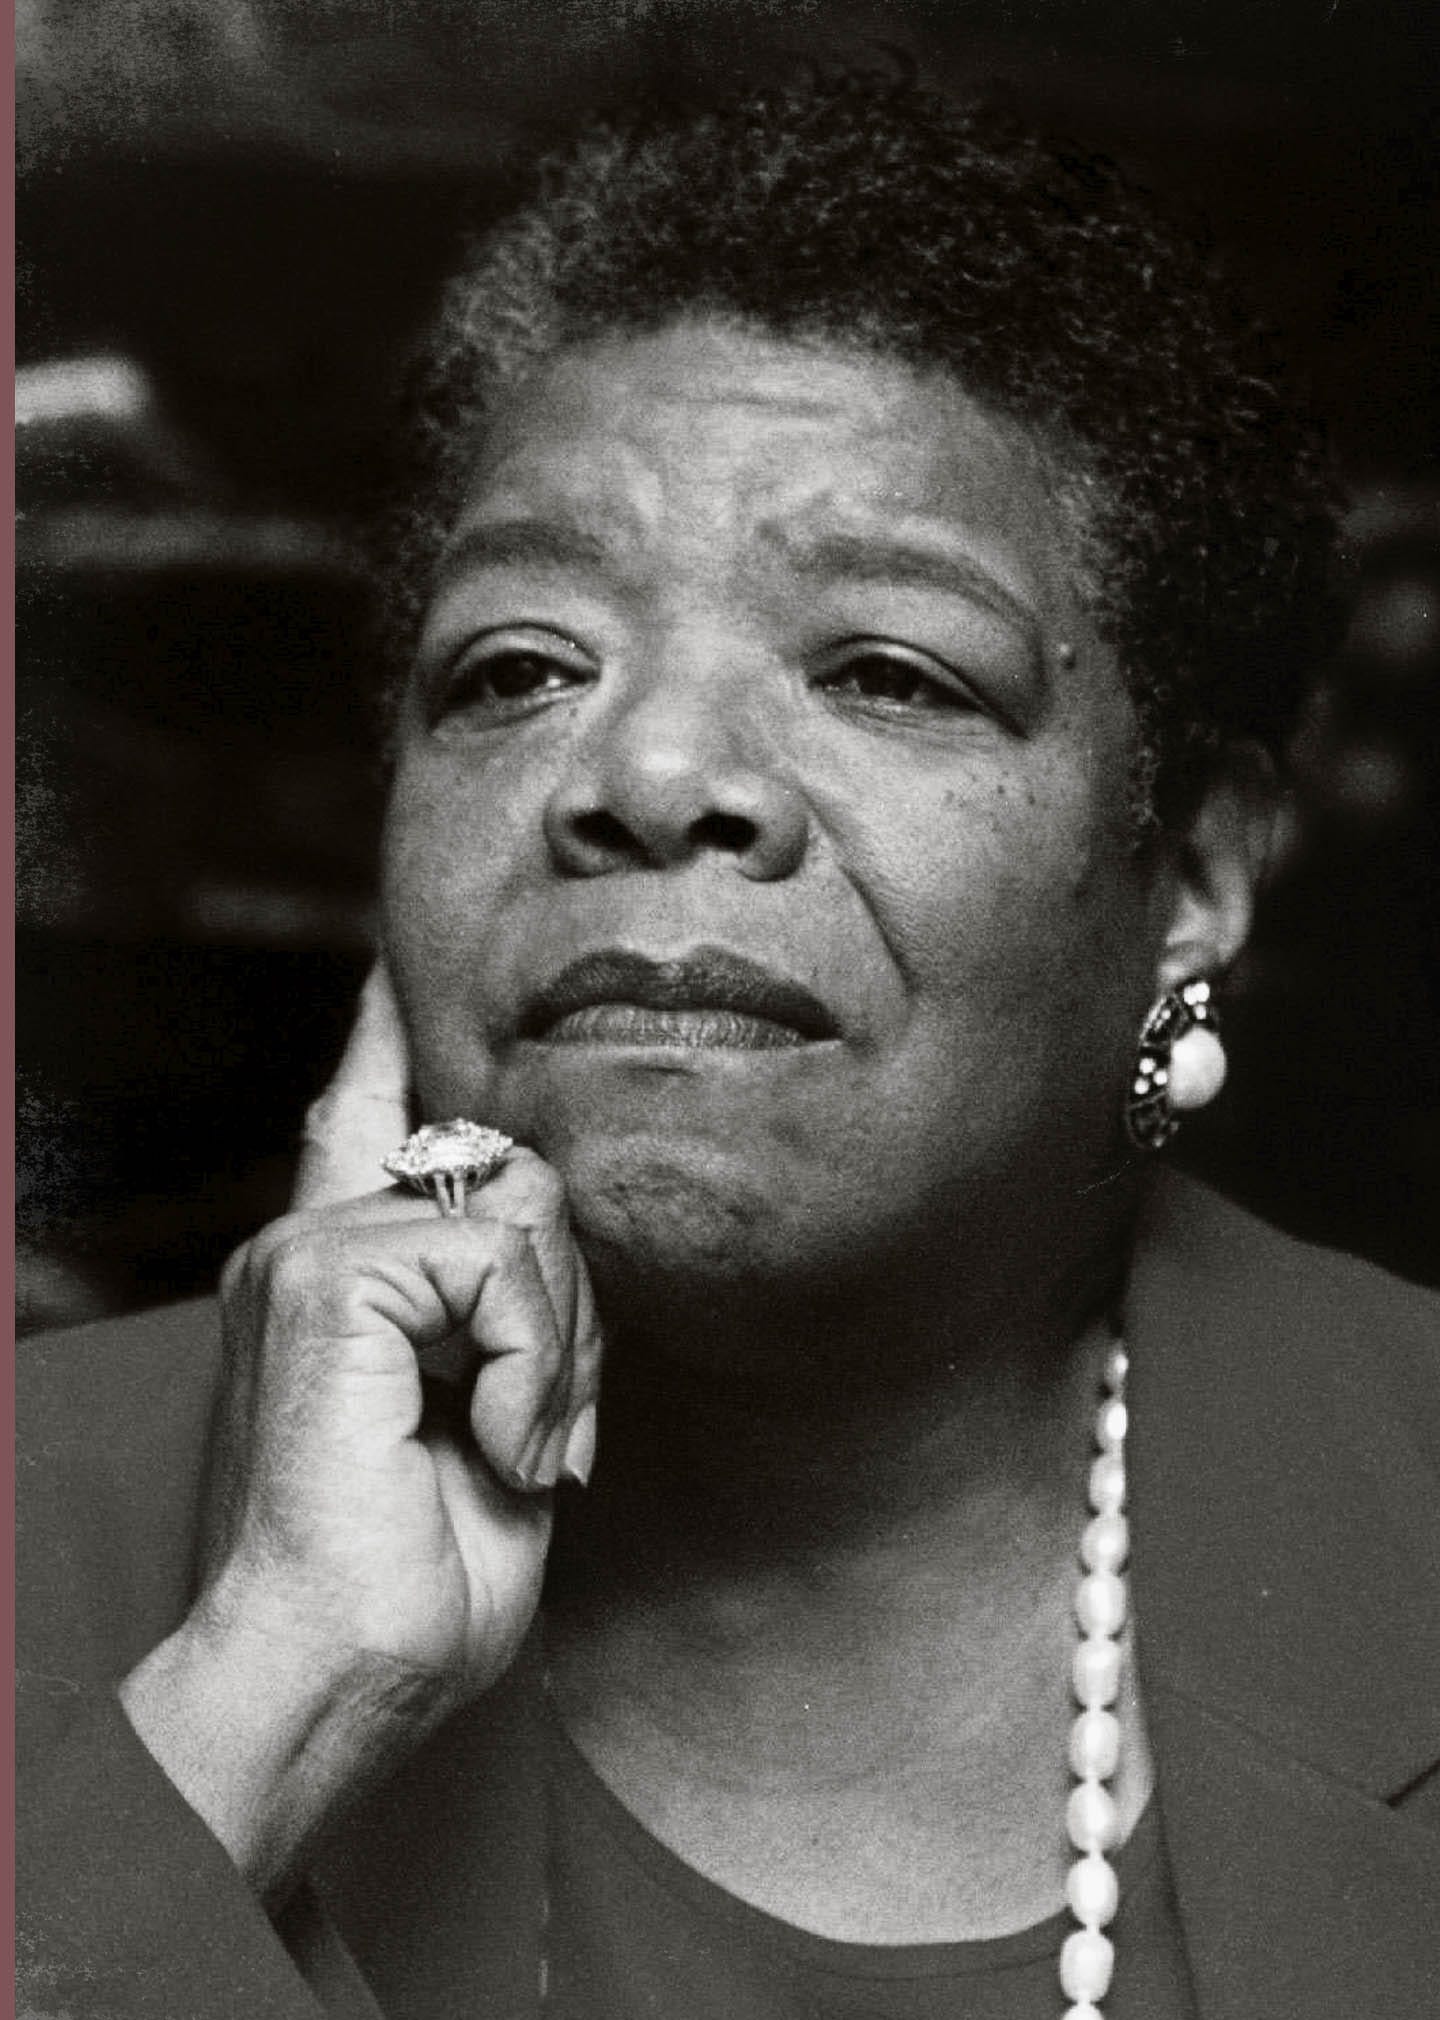 Maya Angelou was a poet and essayist who died in 2014.